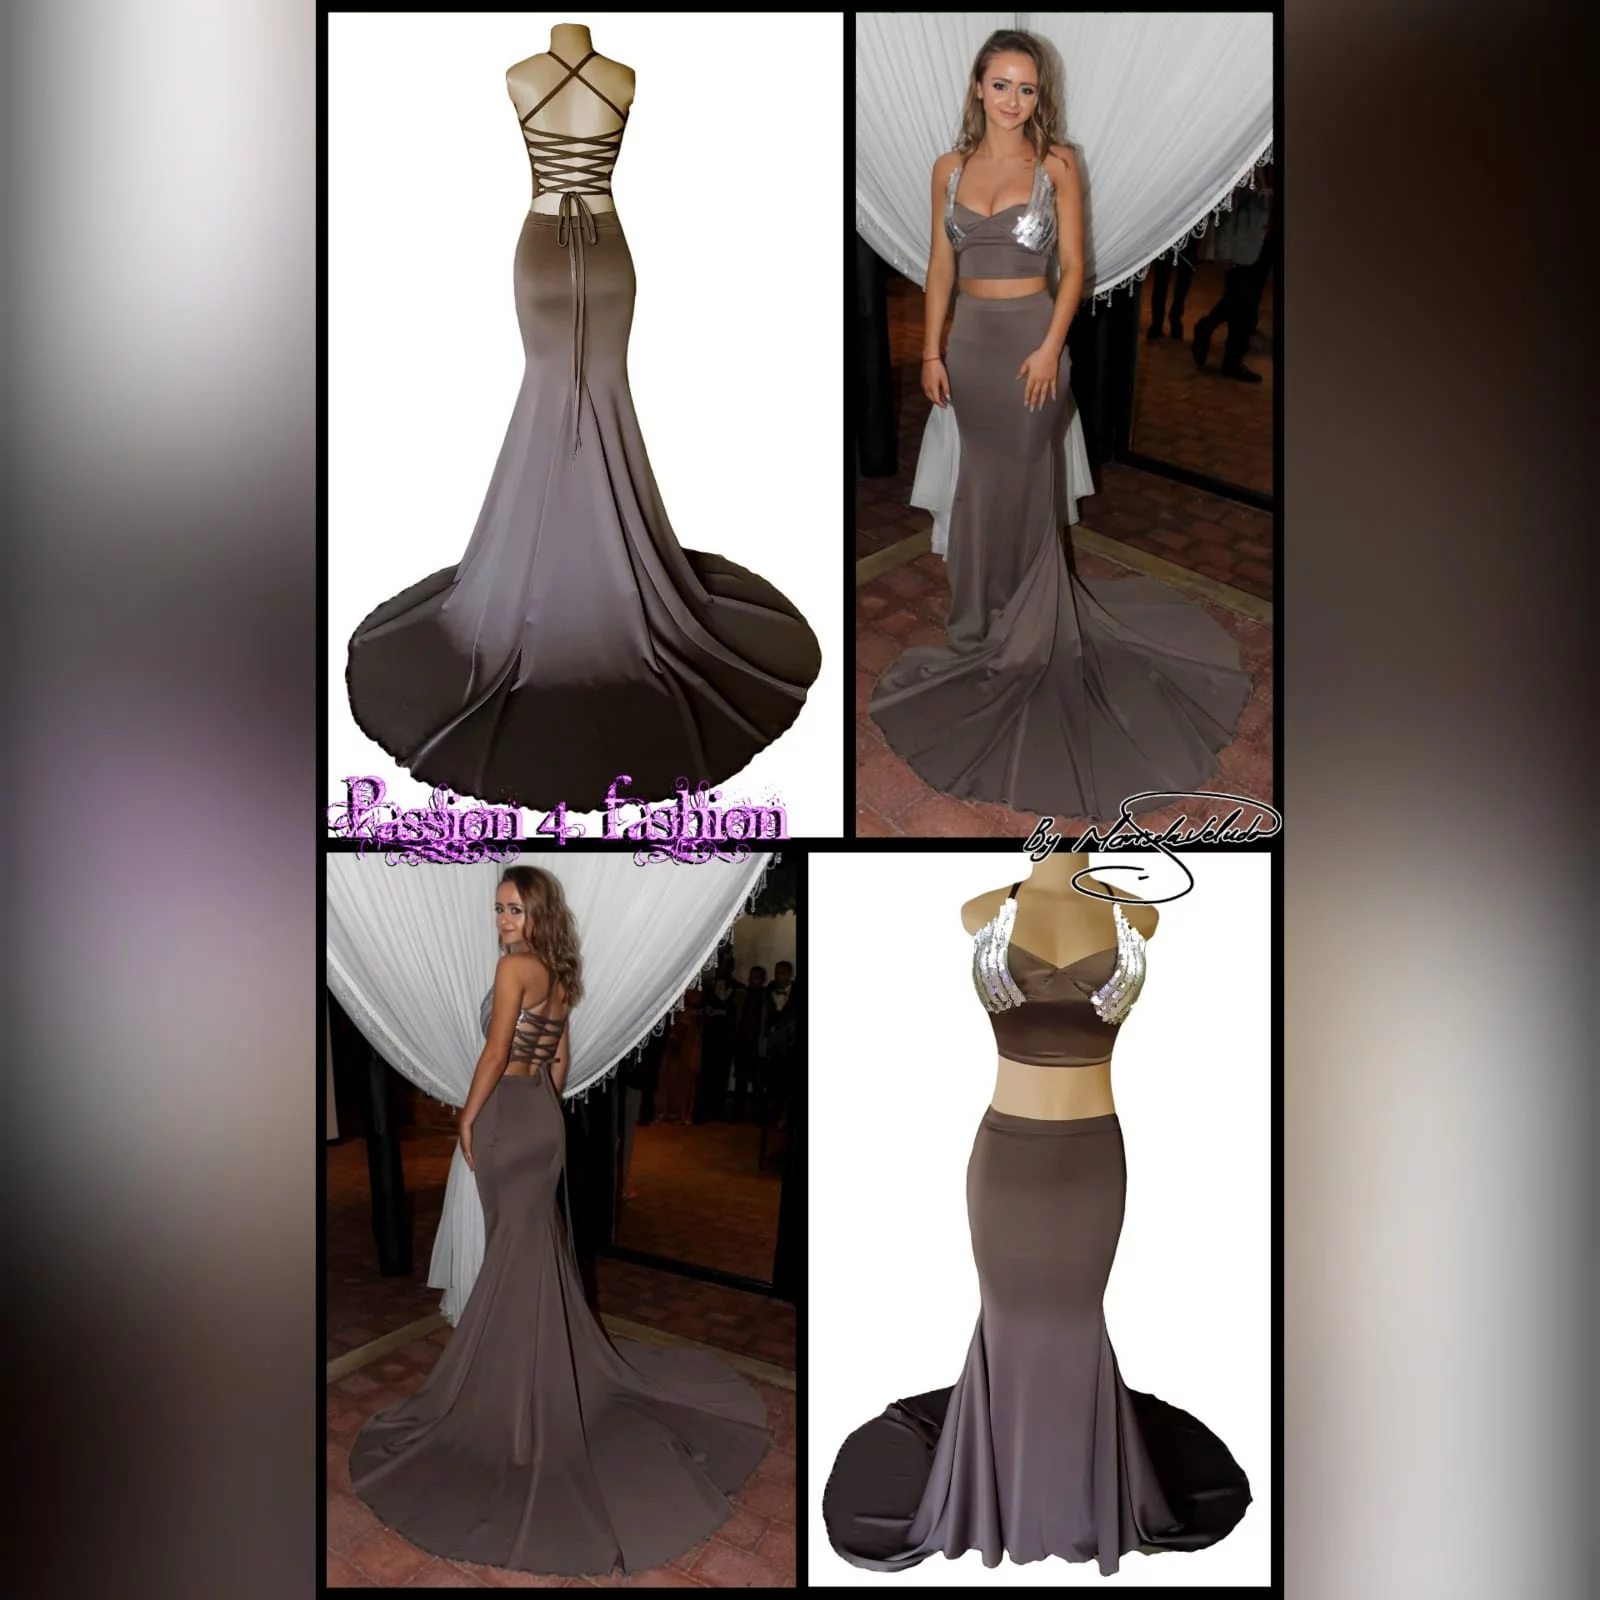 2 piece brown grey matric dance dress 6 2 piece brown grey matric dance dress. Skirt as a soft mermaid. Top with an open lace up back. Bust detailed with sequins. With a long train.